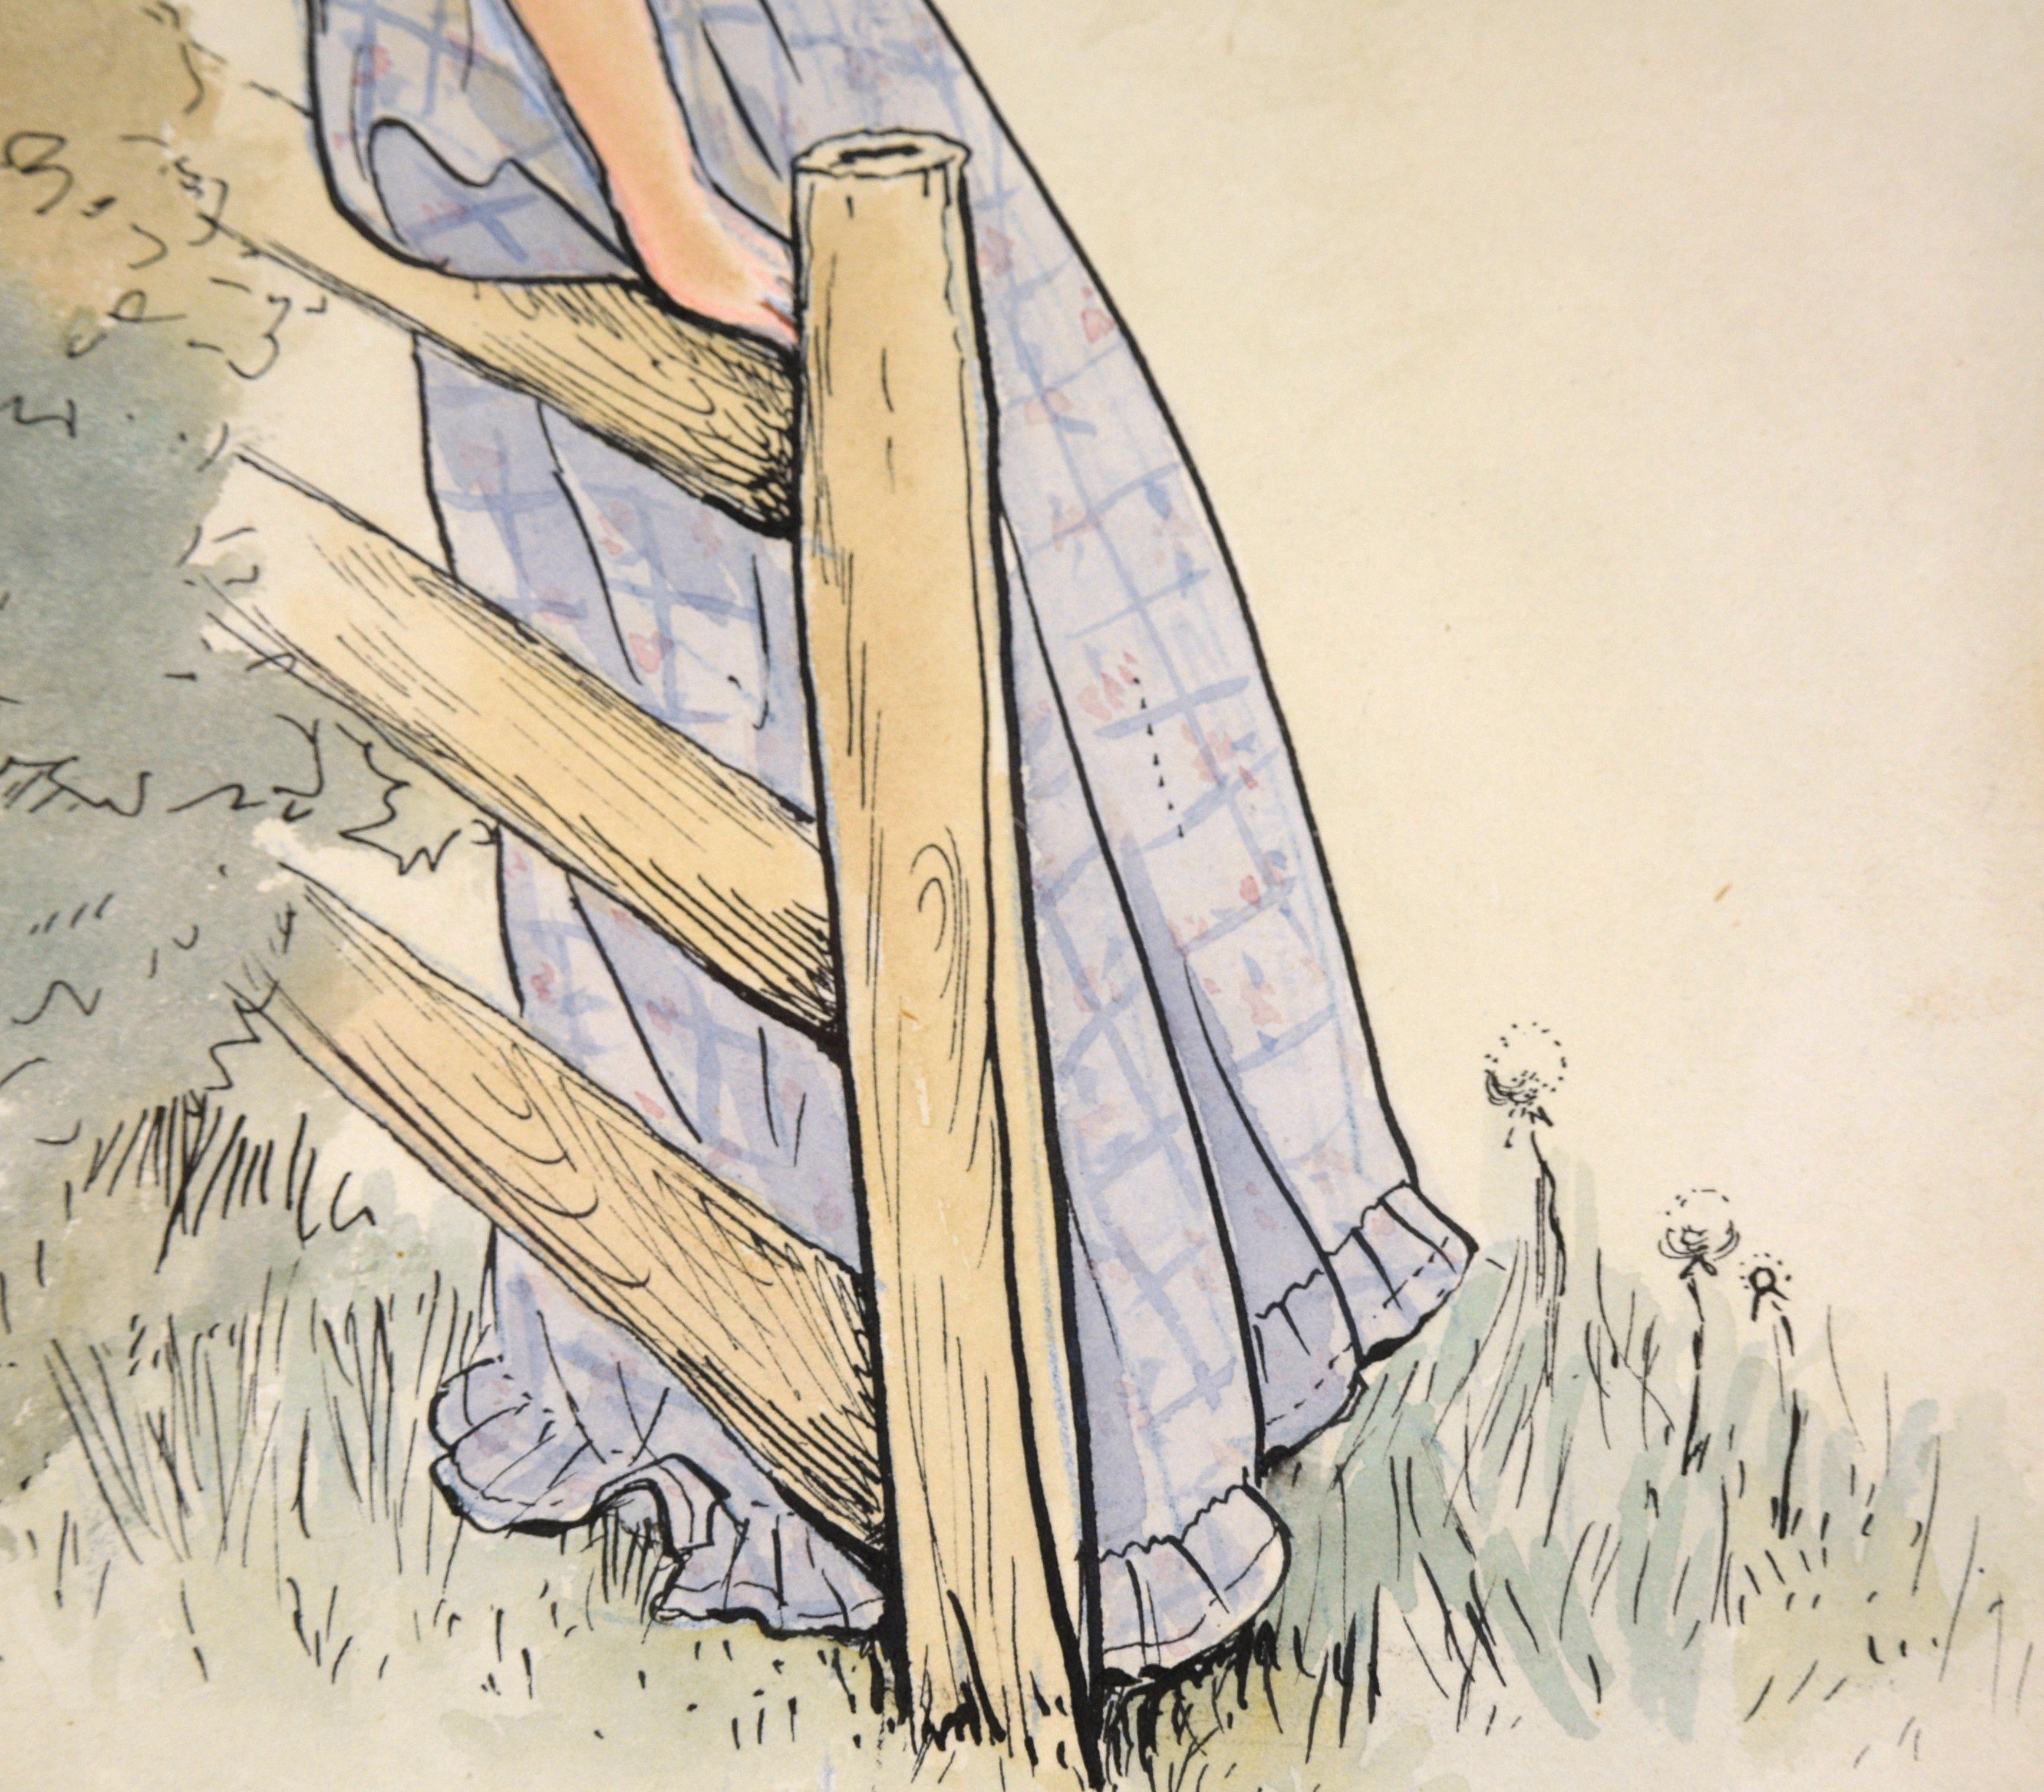 1920's Illustration of a Country Girl - Realist Art by M. Solomon